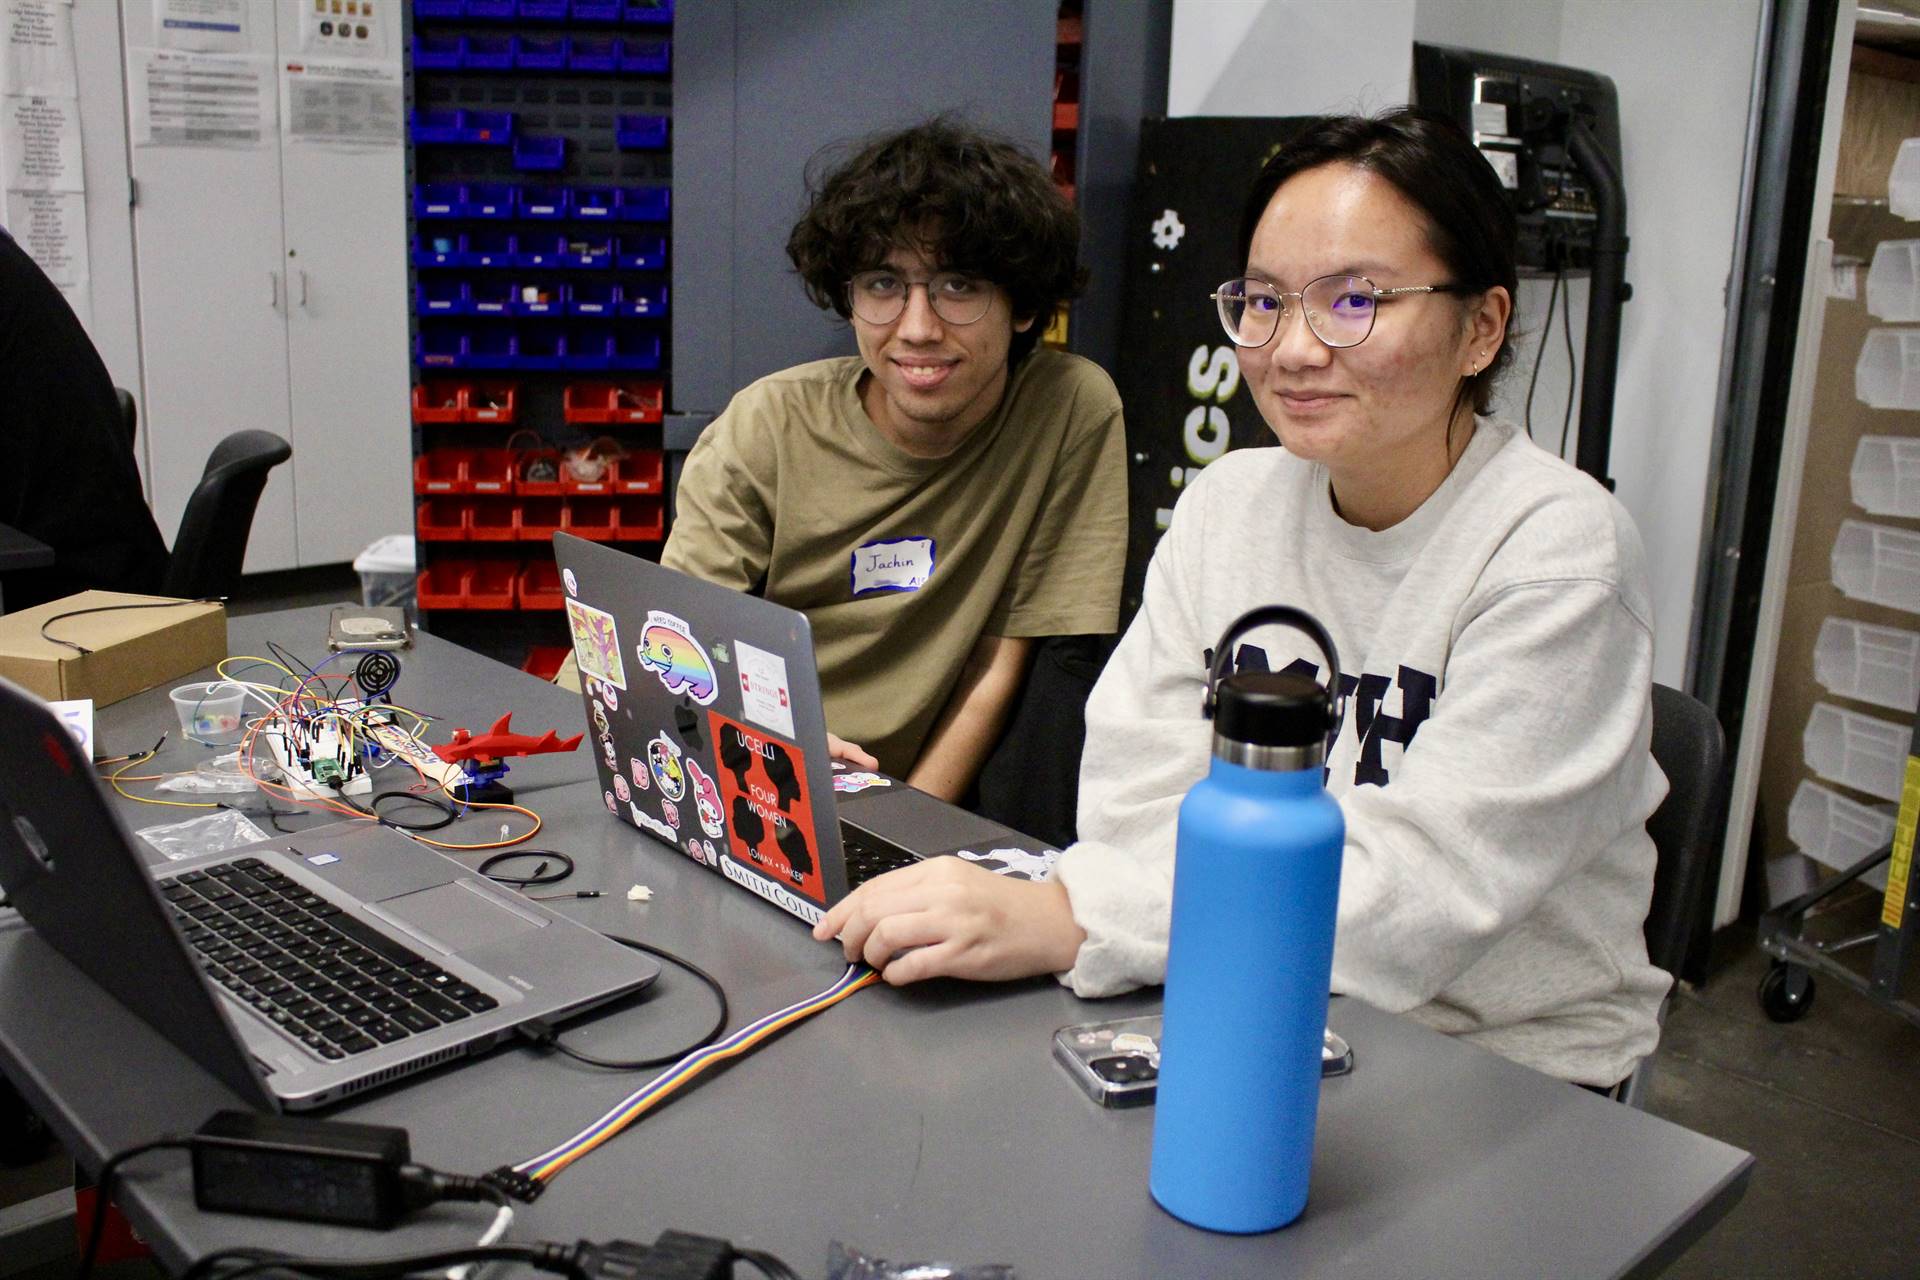 Two students smiling for a photo while engaging in a hackathon to code a game